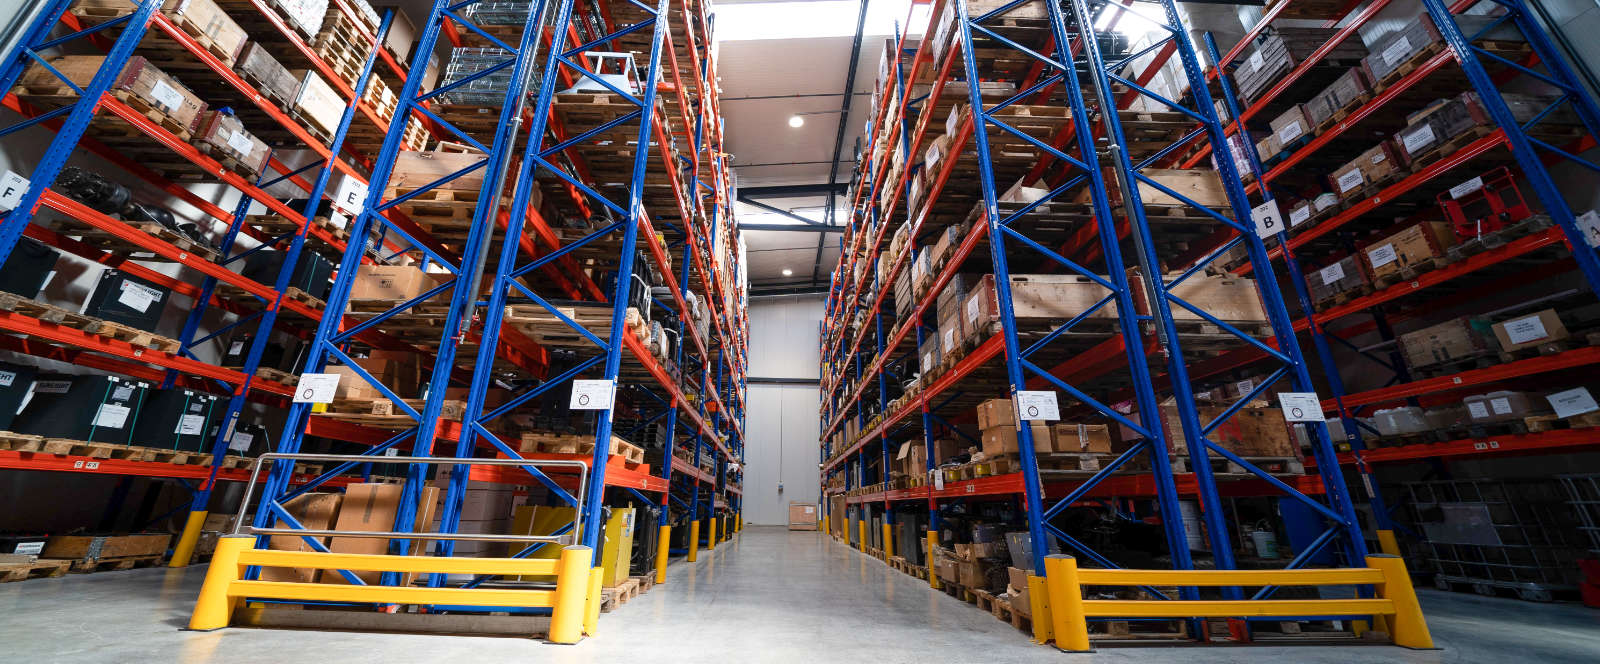 The ground floor of our warehouse. Neuwerth, it is more than 18,000 references of spare parts on 3 floors